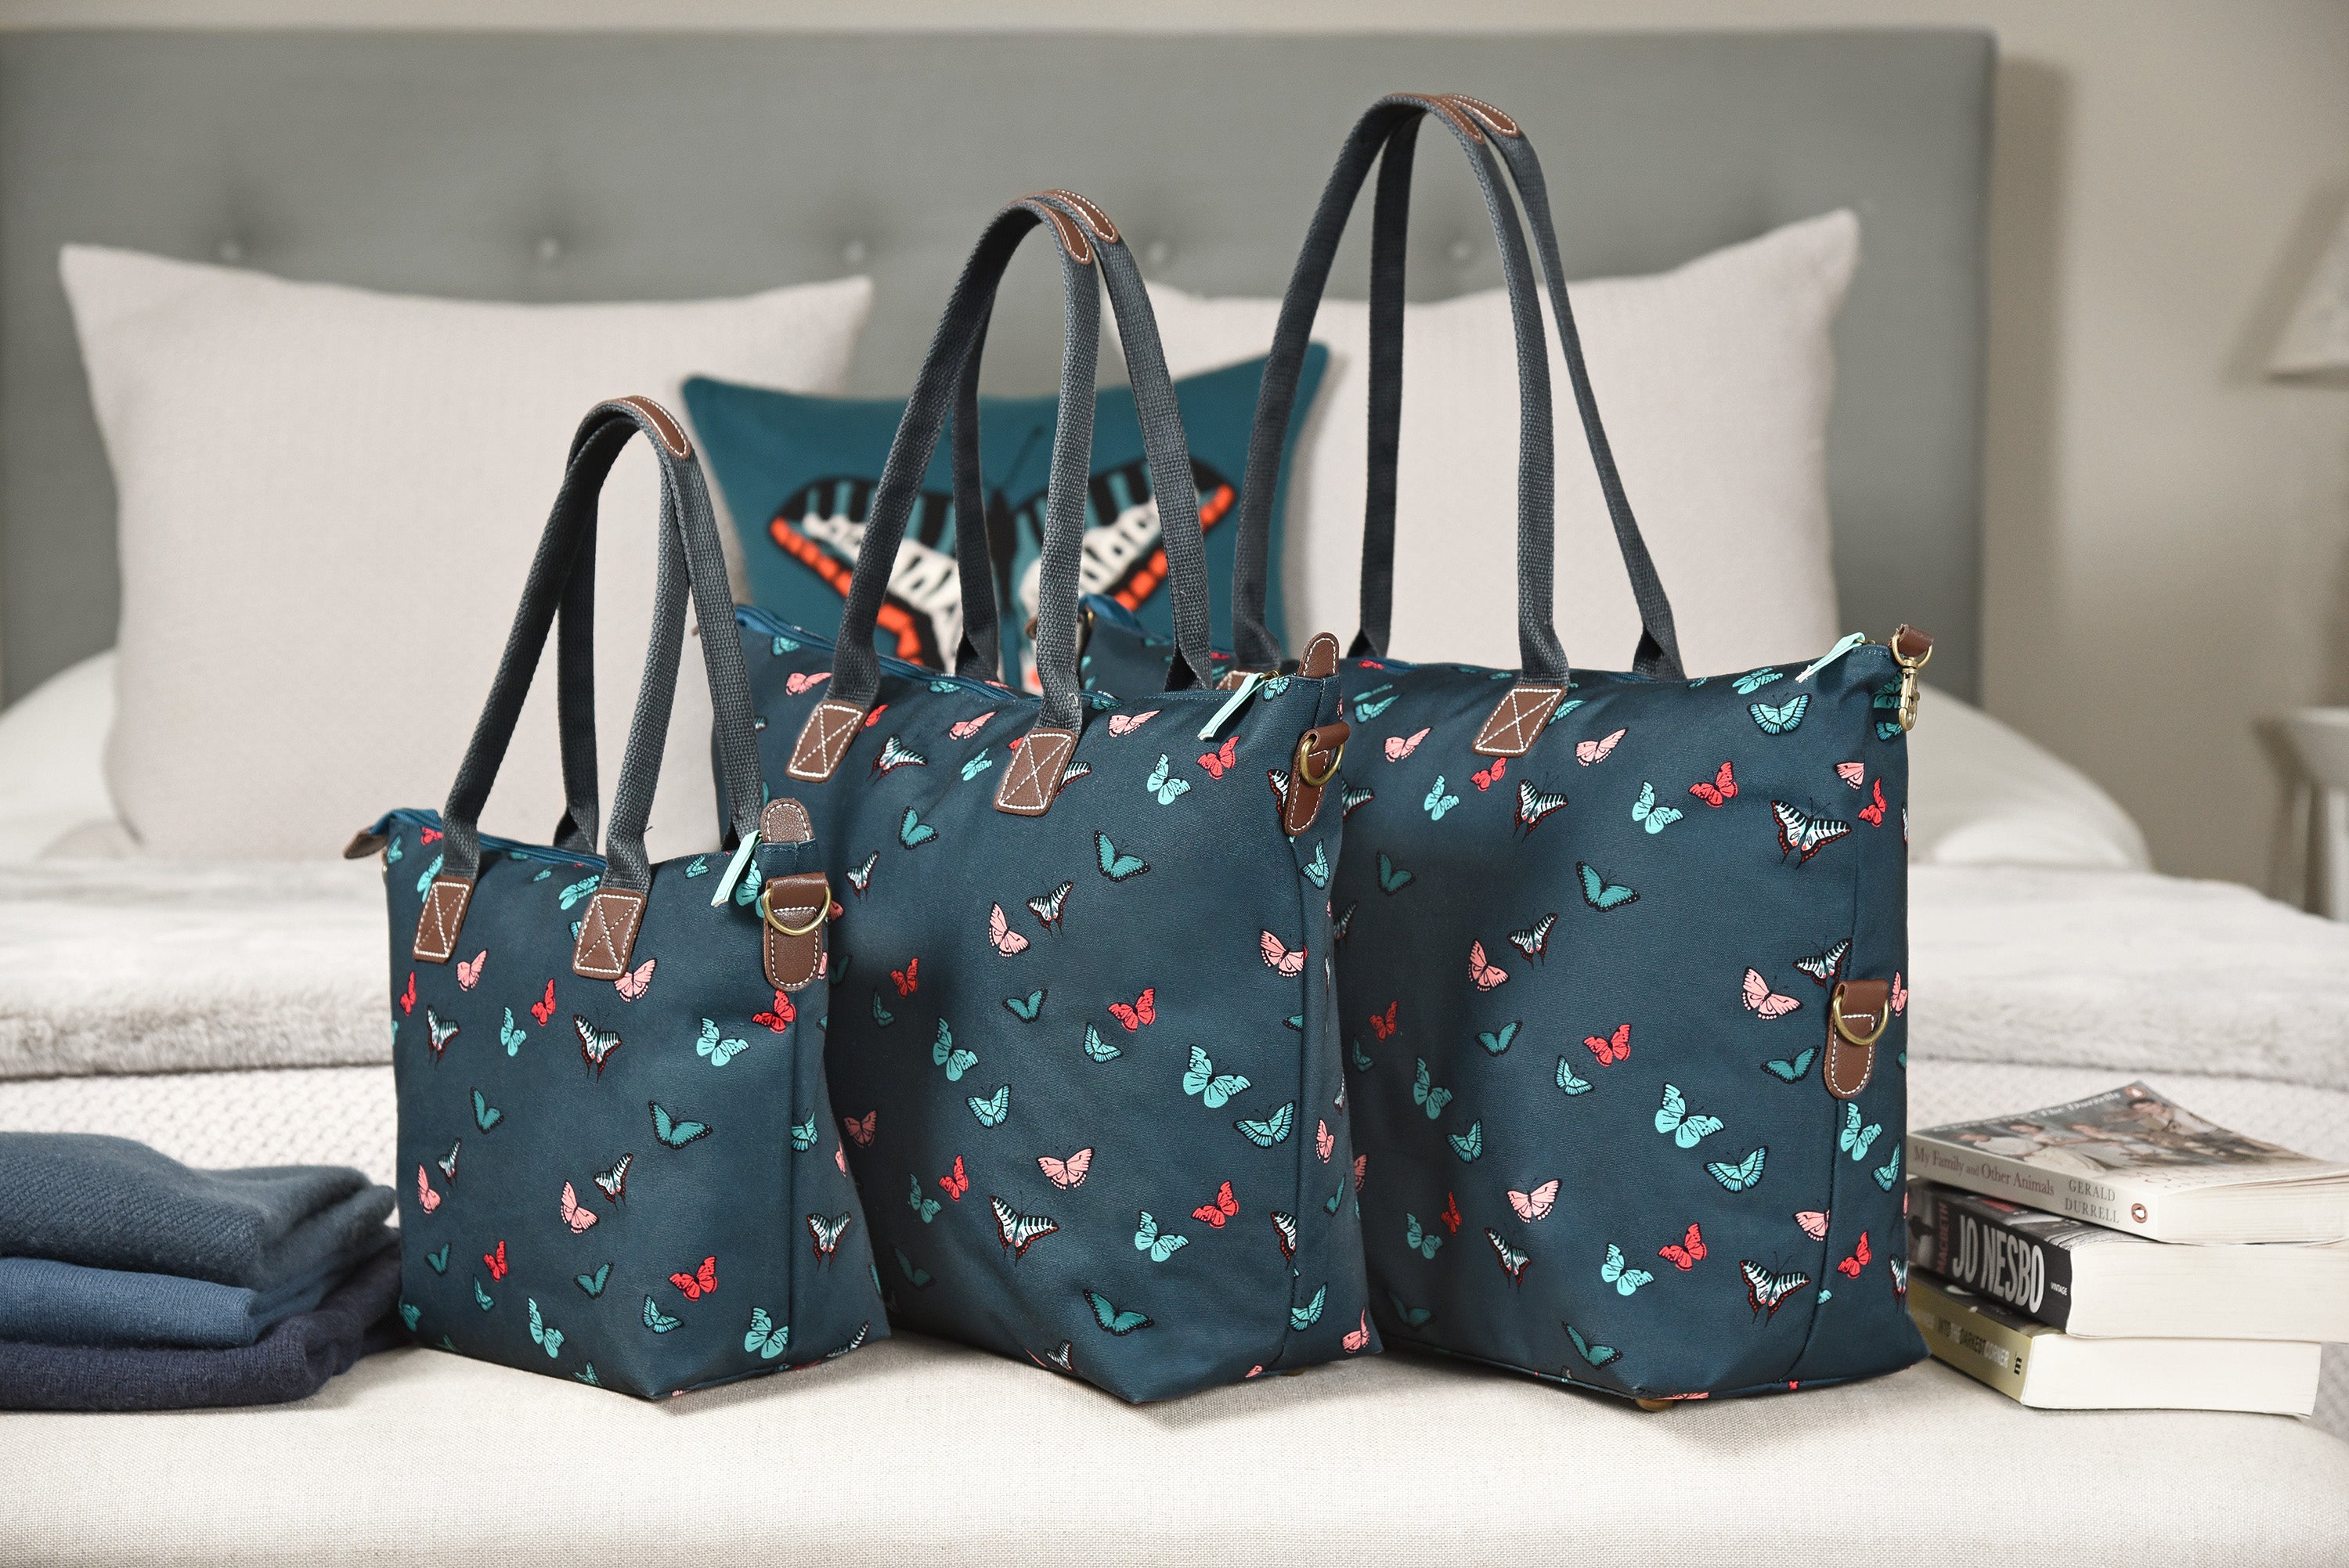 Butterflies Oundle Bag by Sophie Allport